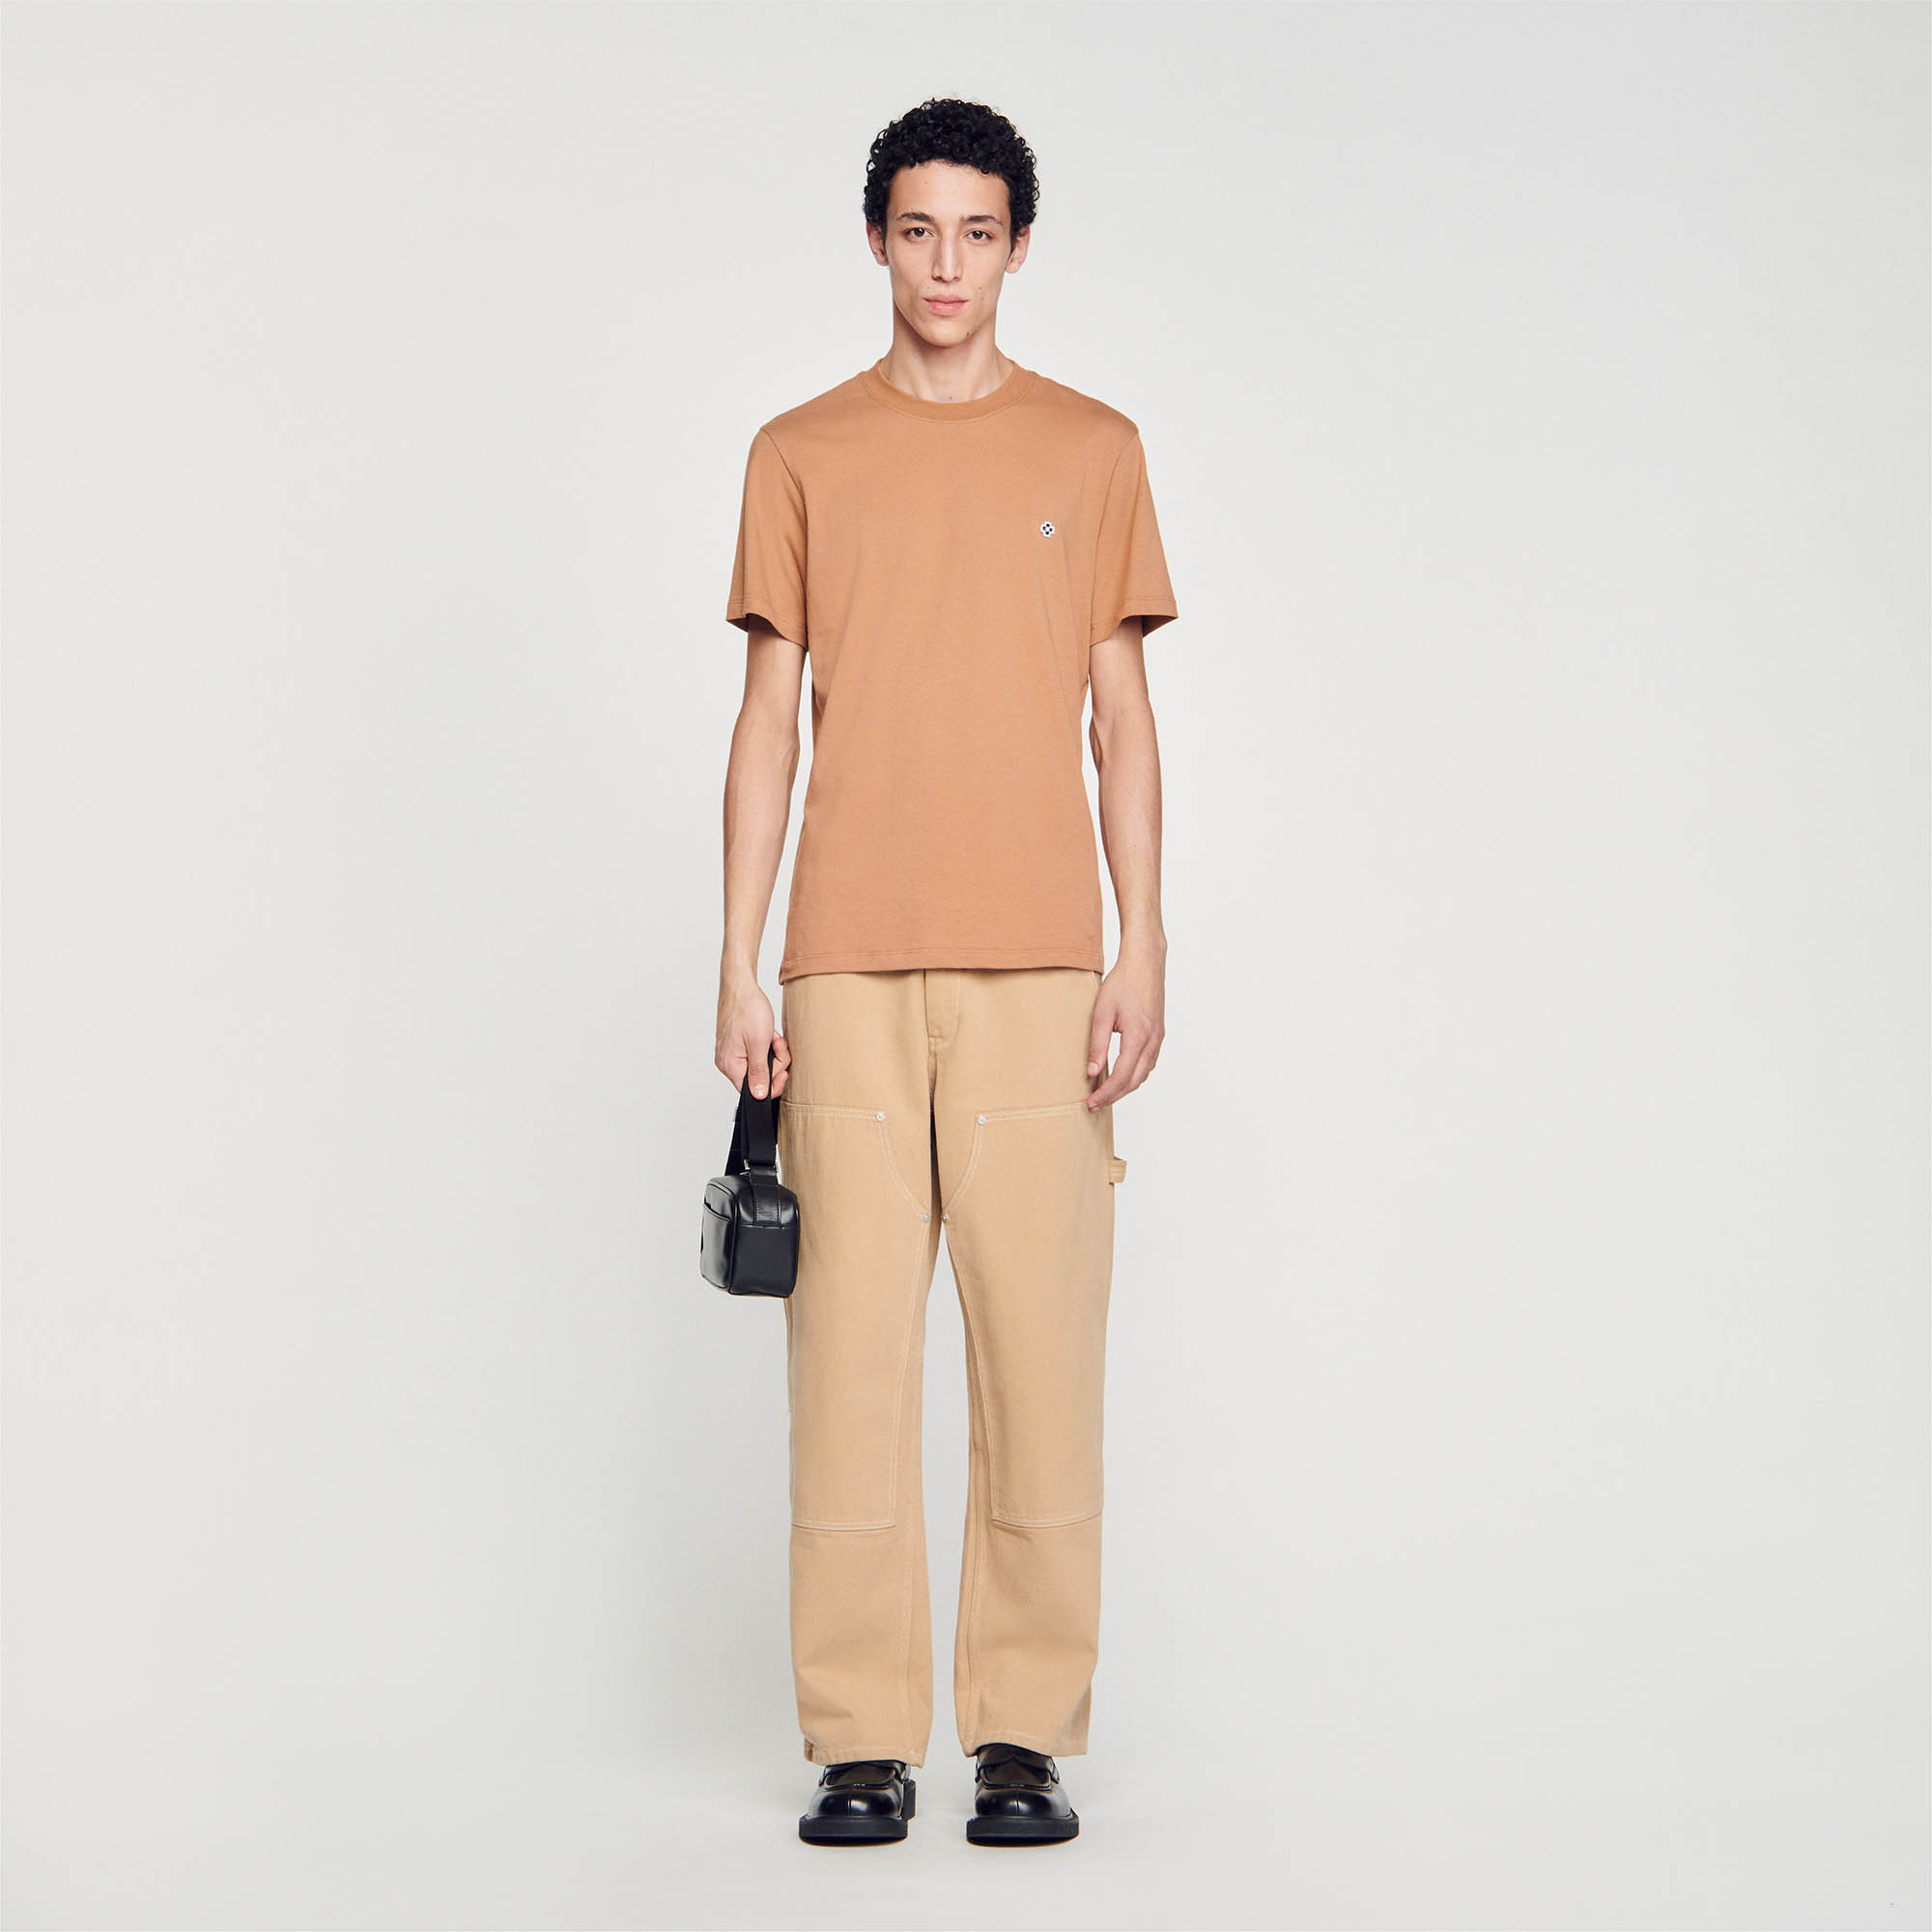 Sandro T-shirt with Square Cross patch